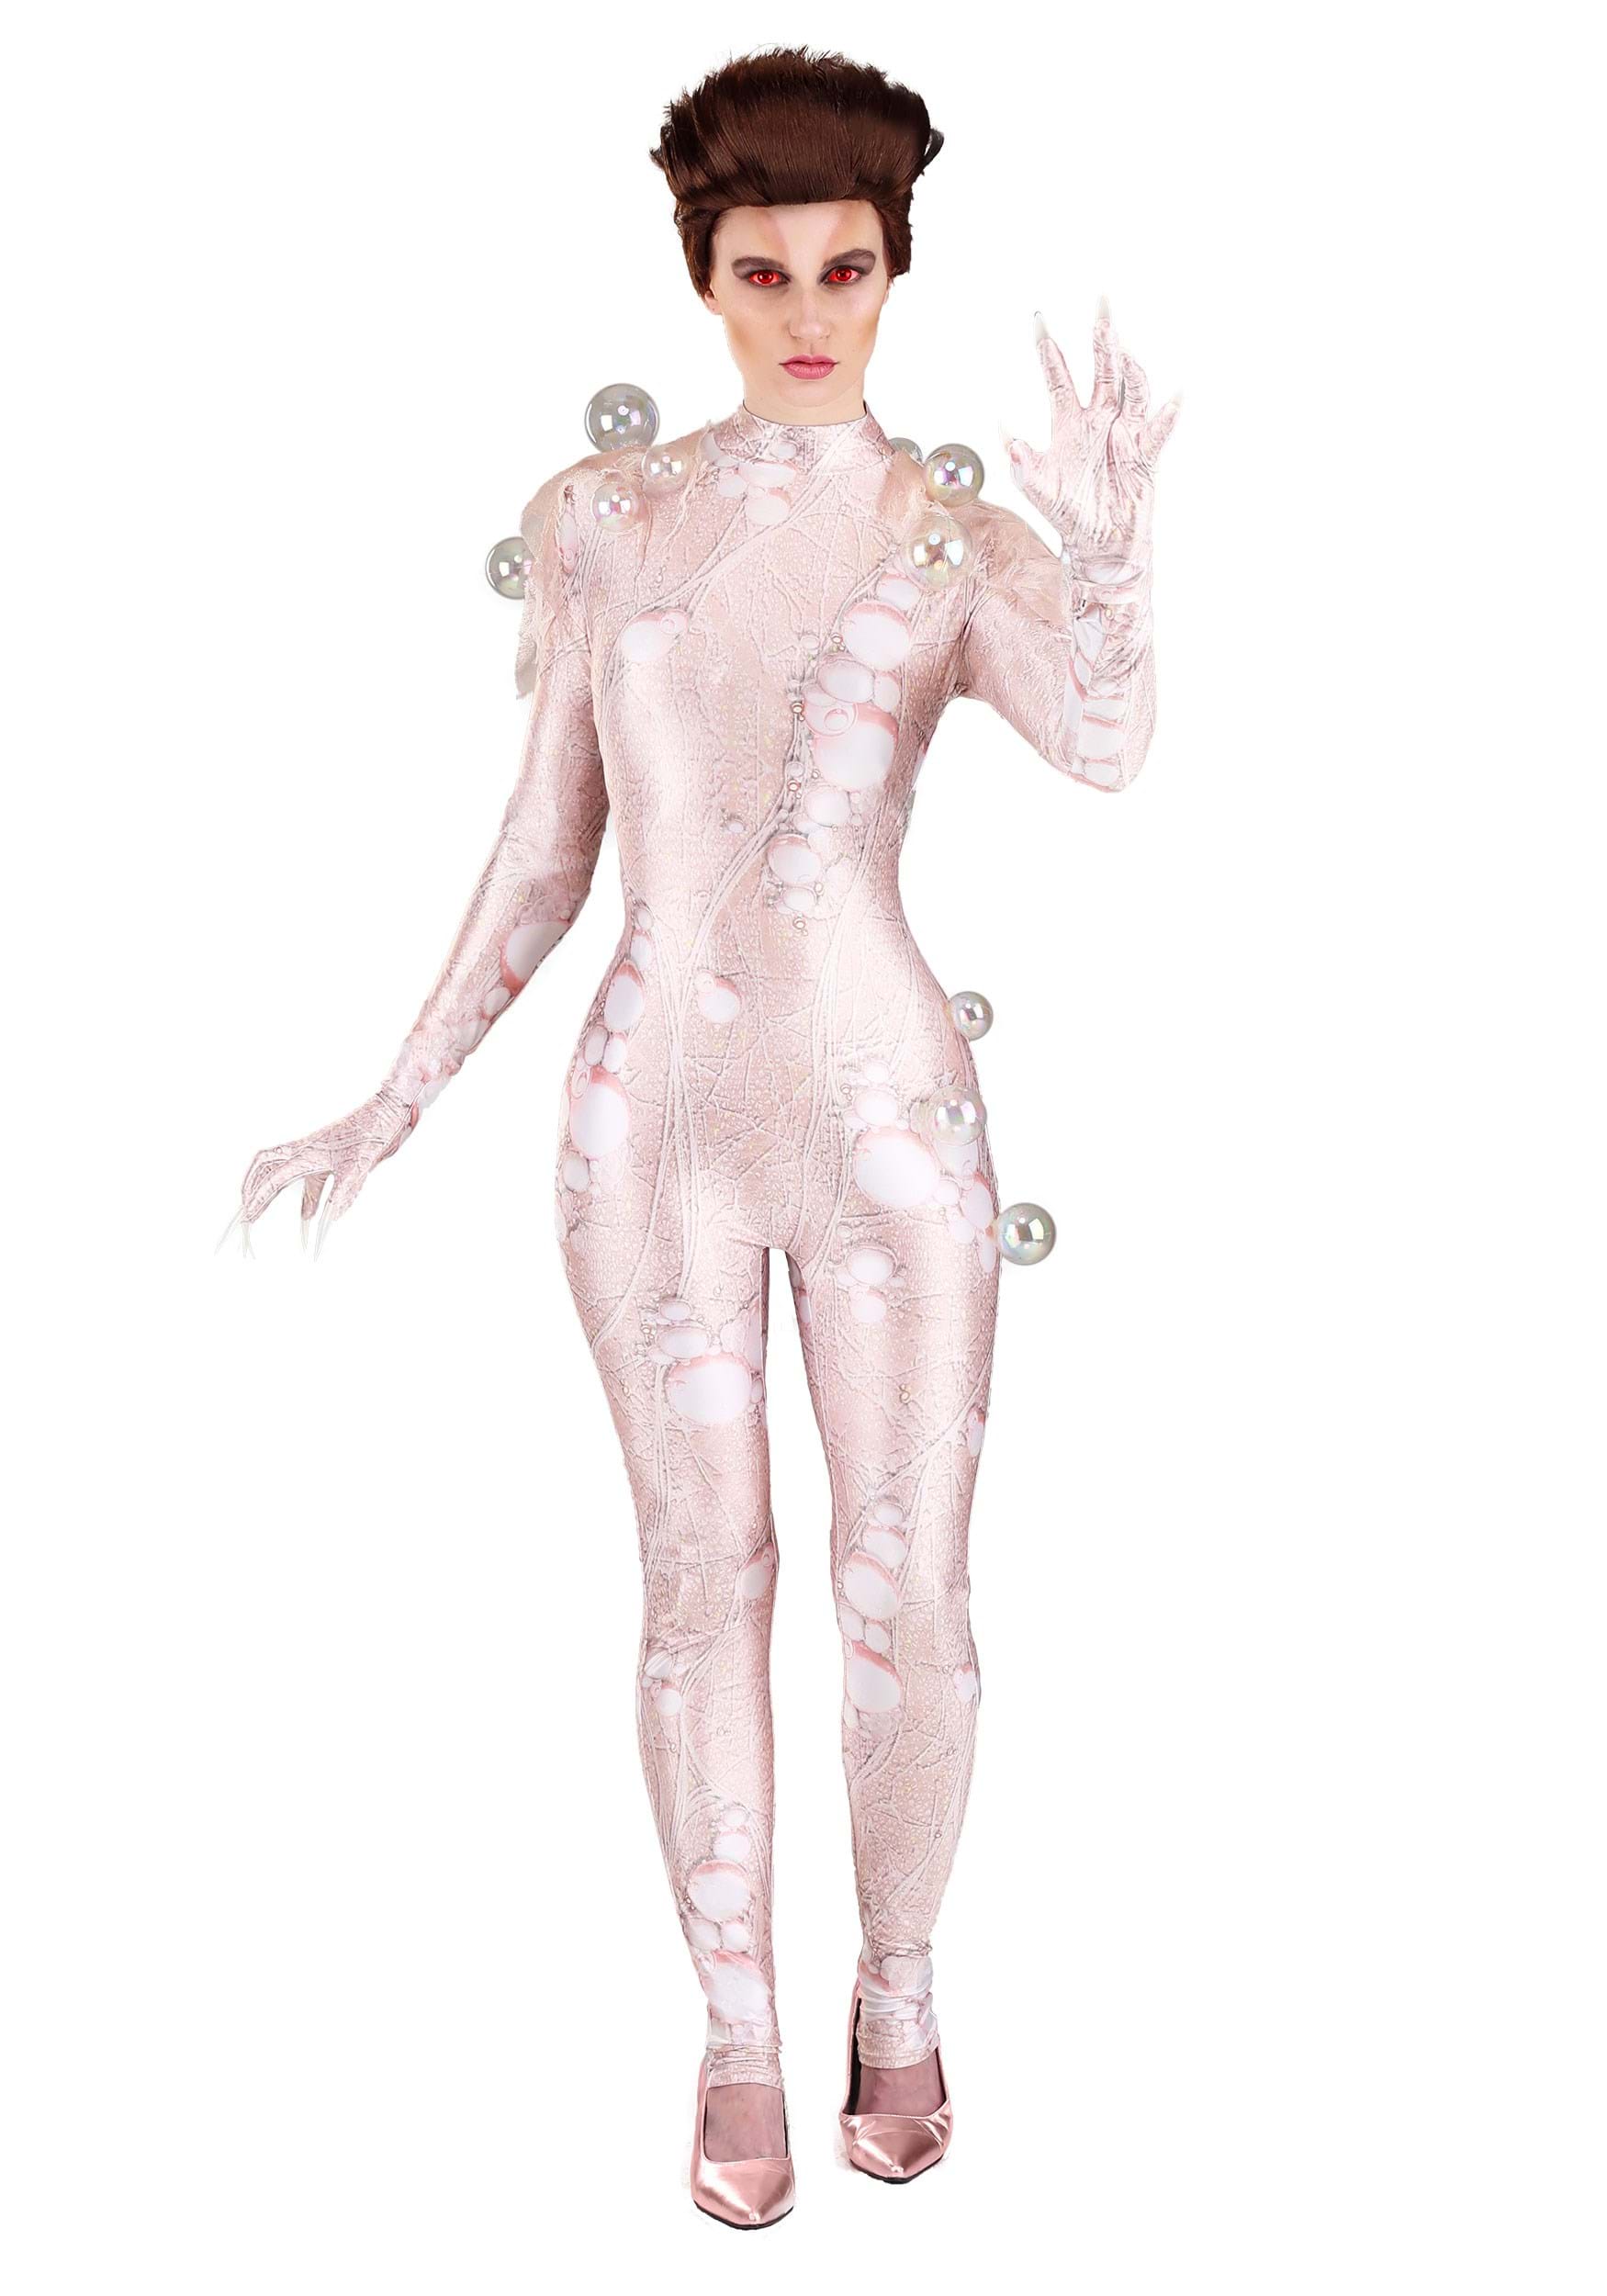 Photos - Fancy Dress Ghostbusters FUN Costumes  Gozer  Costume for Women Pink/Bei 